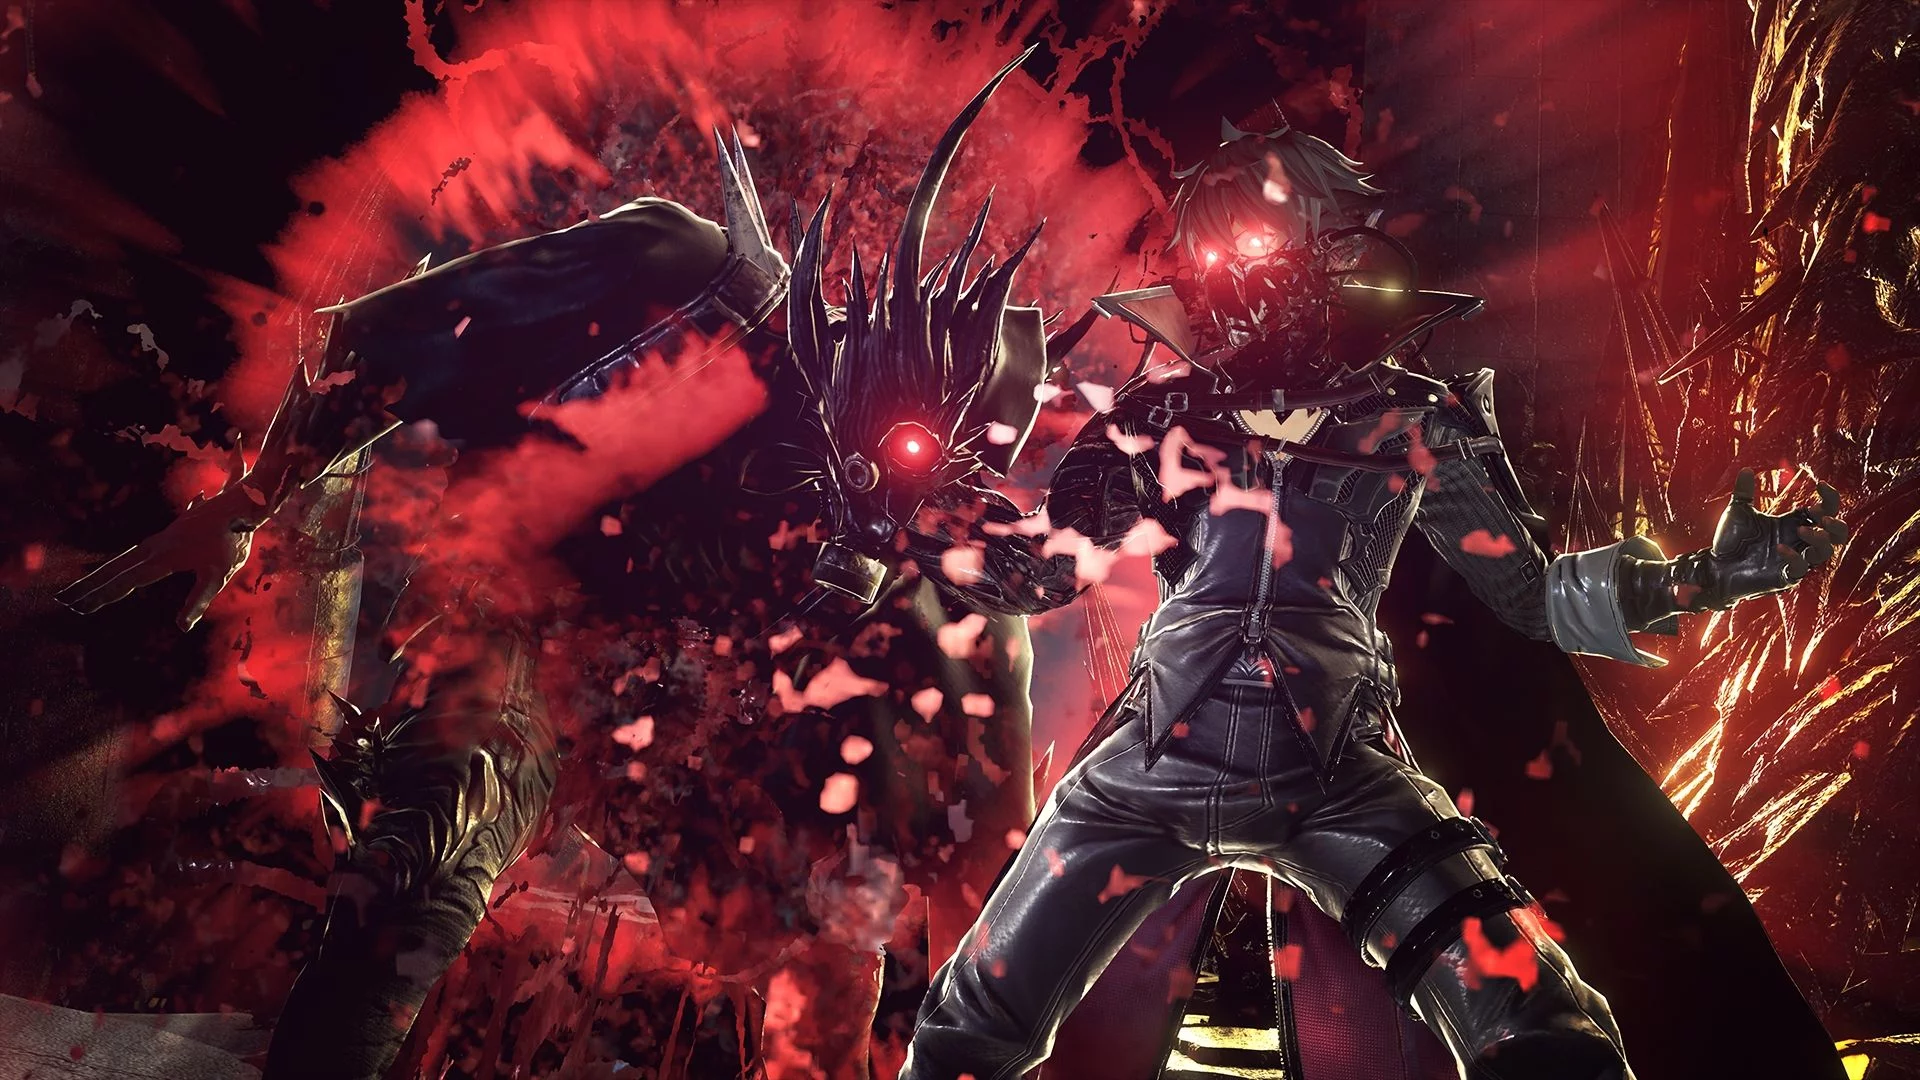 Code Vein Set To Officially Release on September 28, Will Be Playable at E3